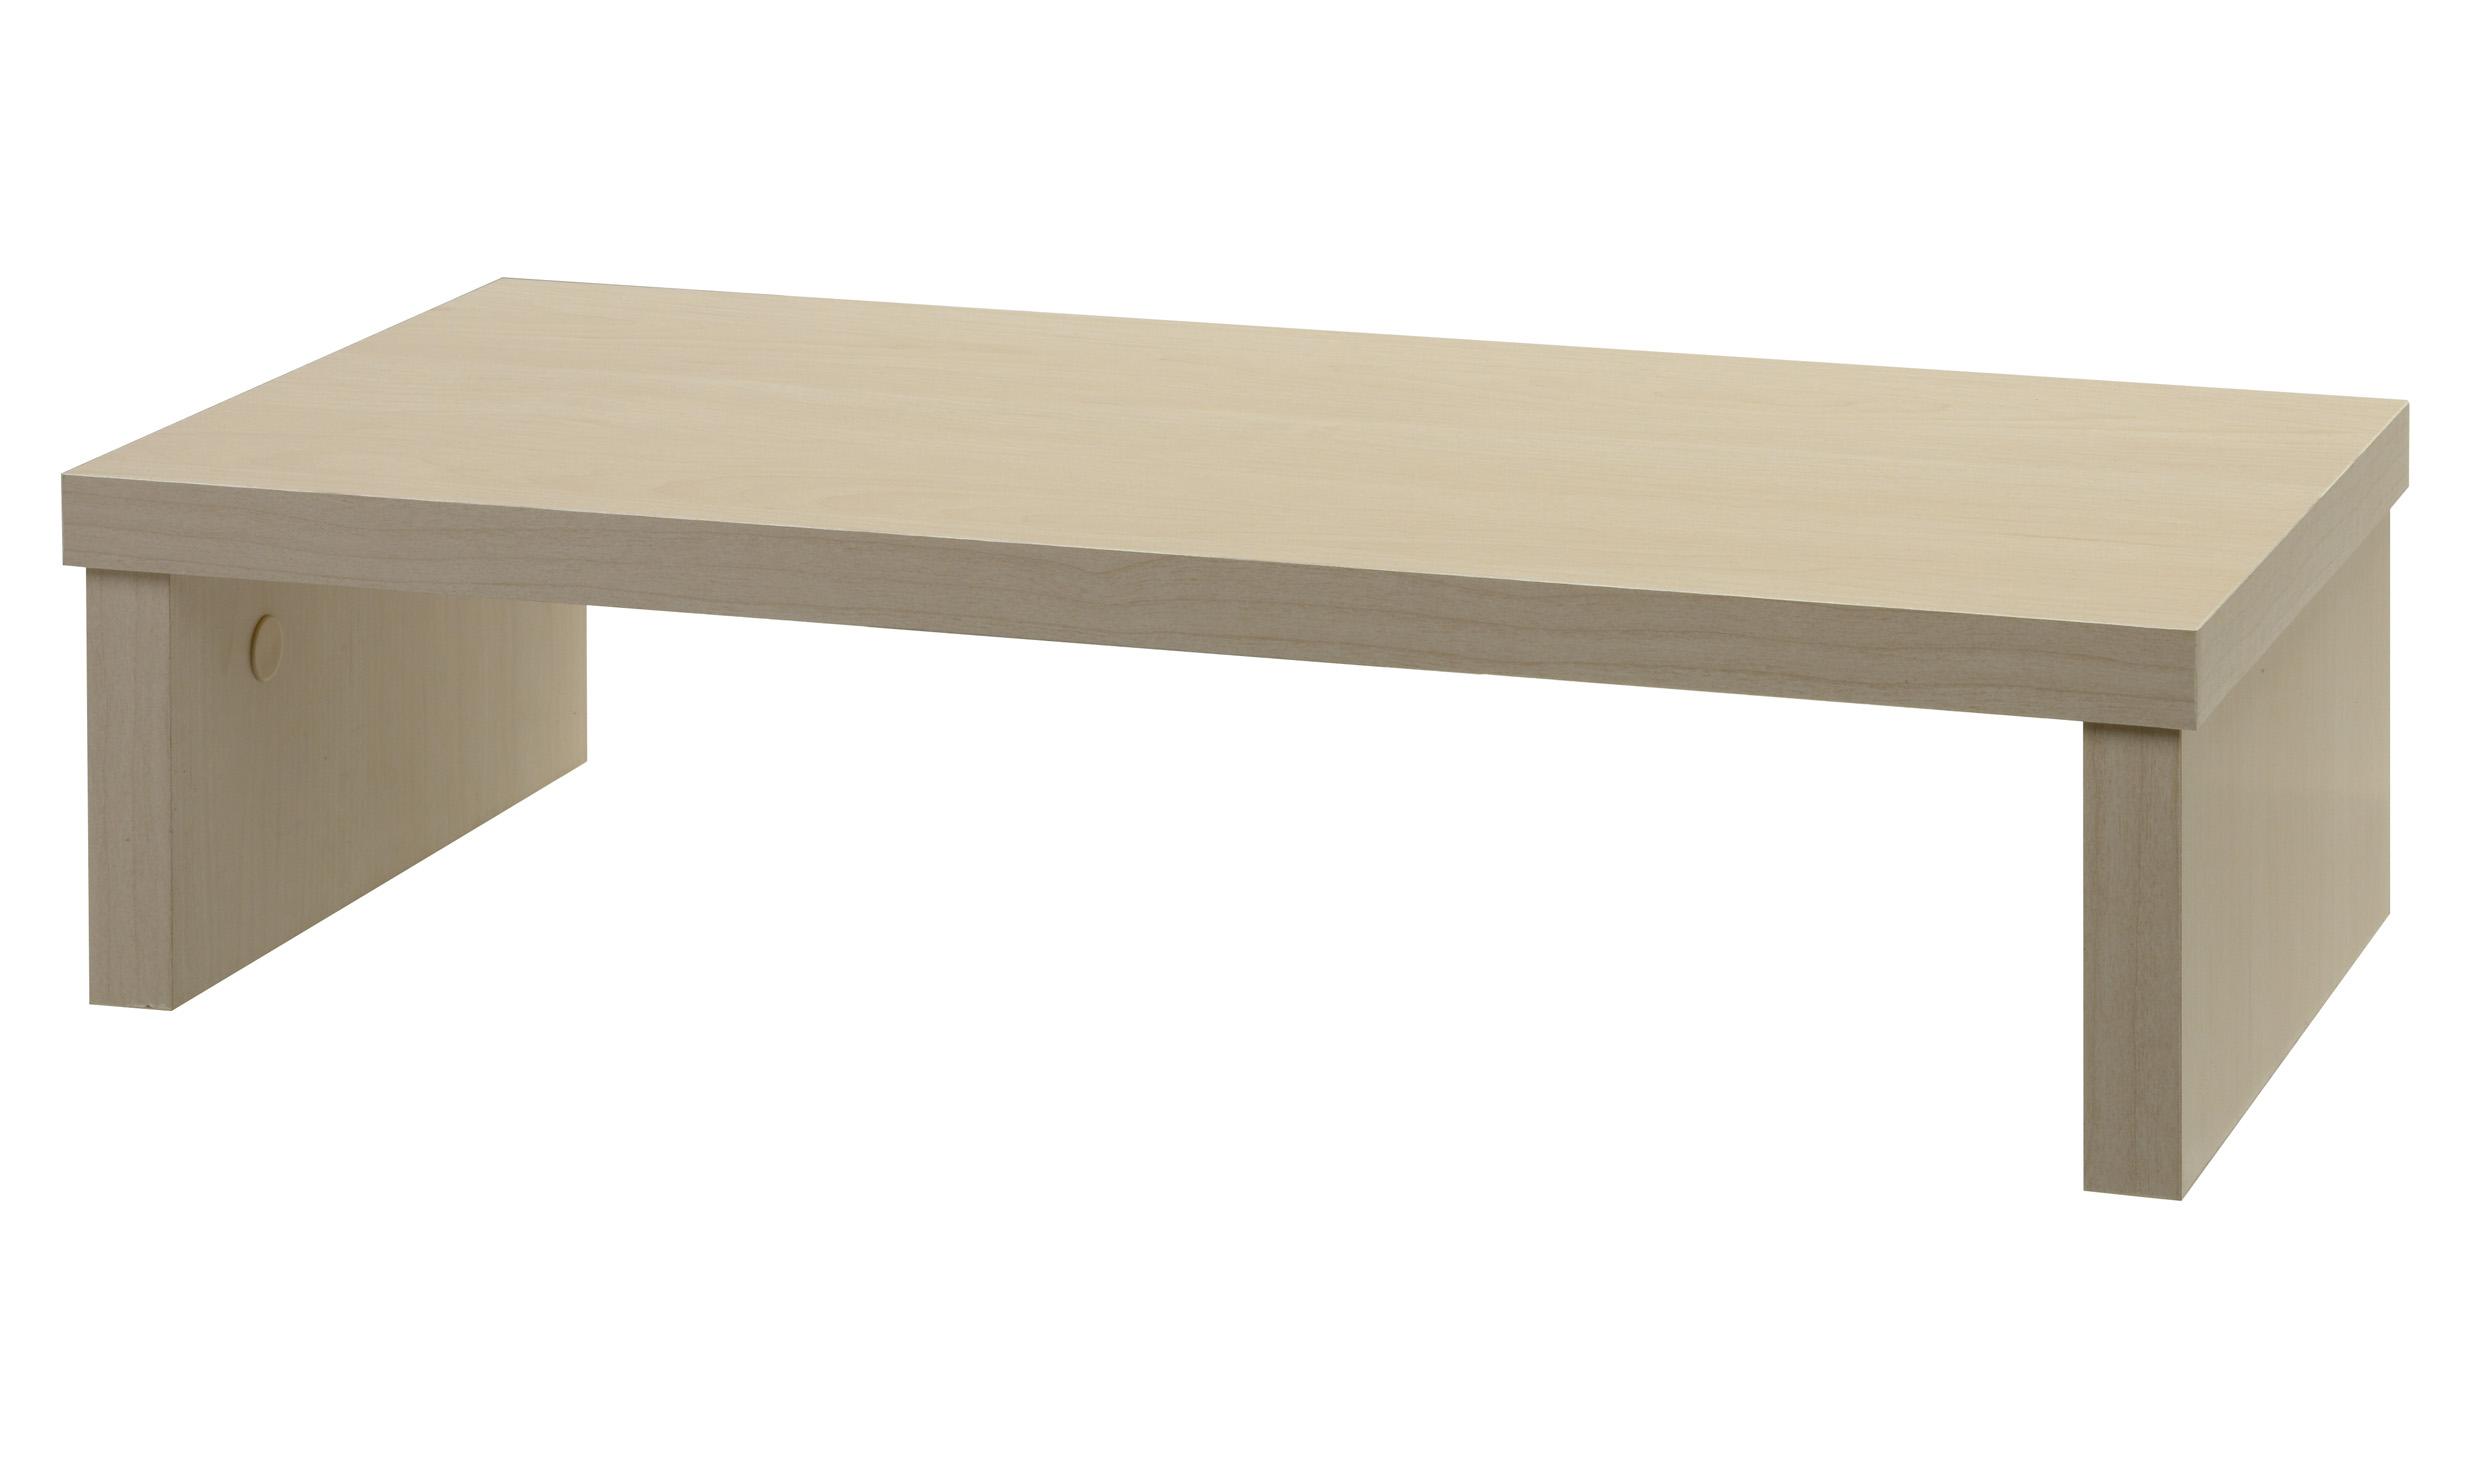 Monitor Stand 30667